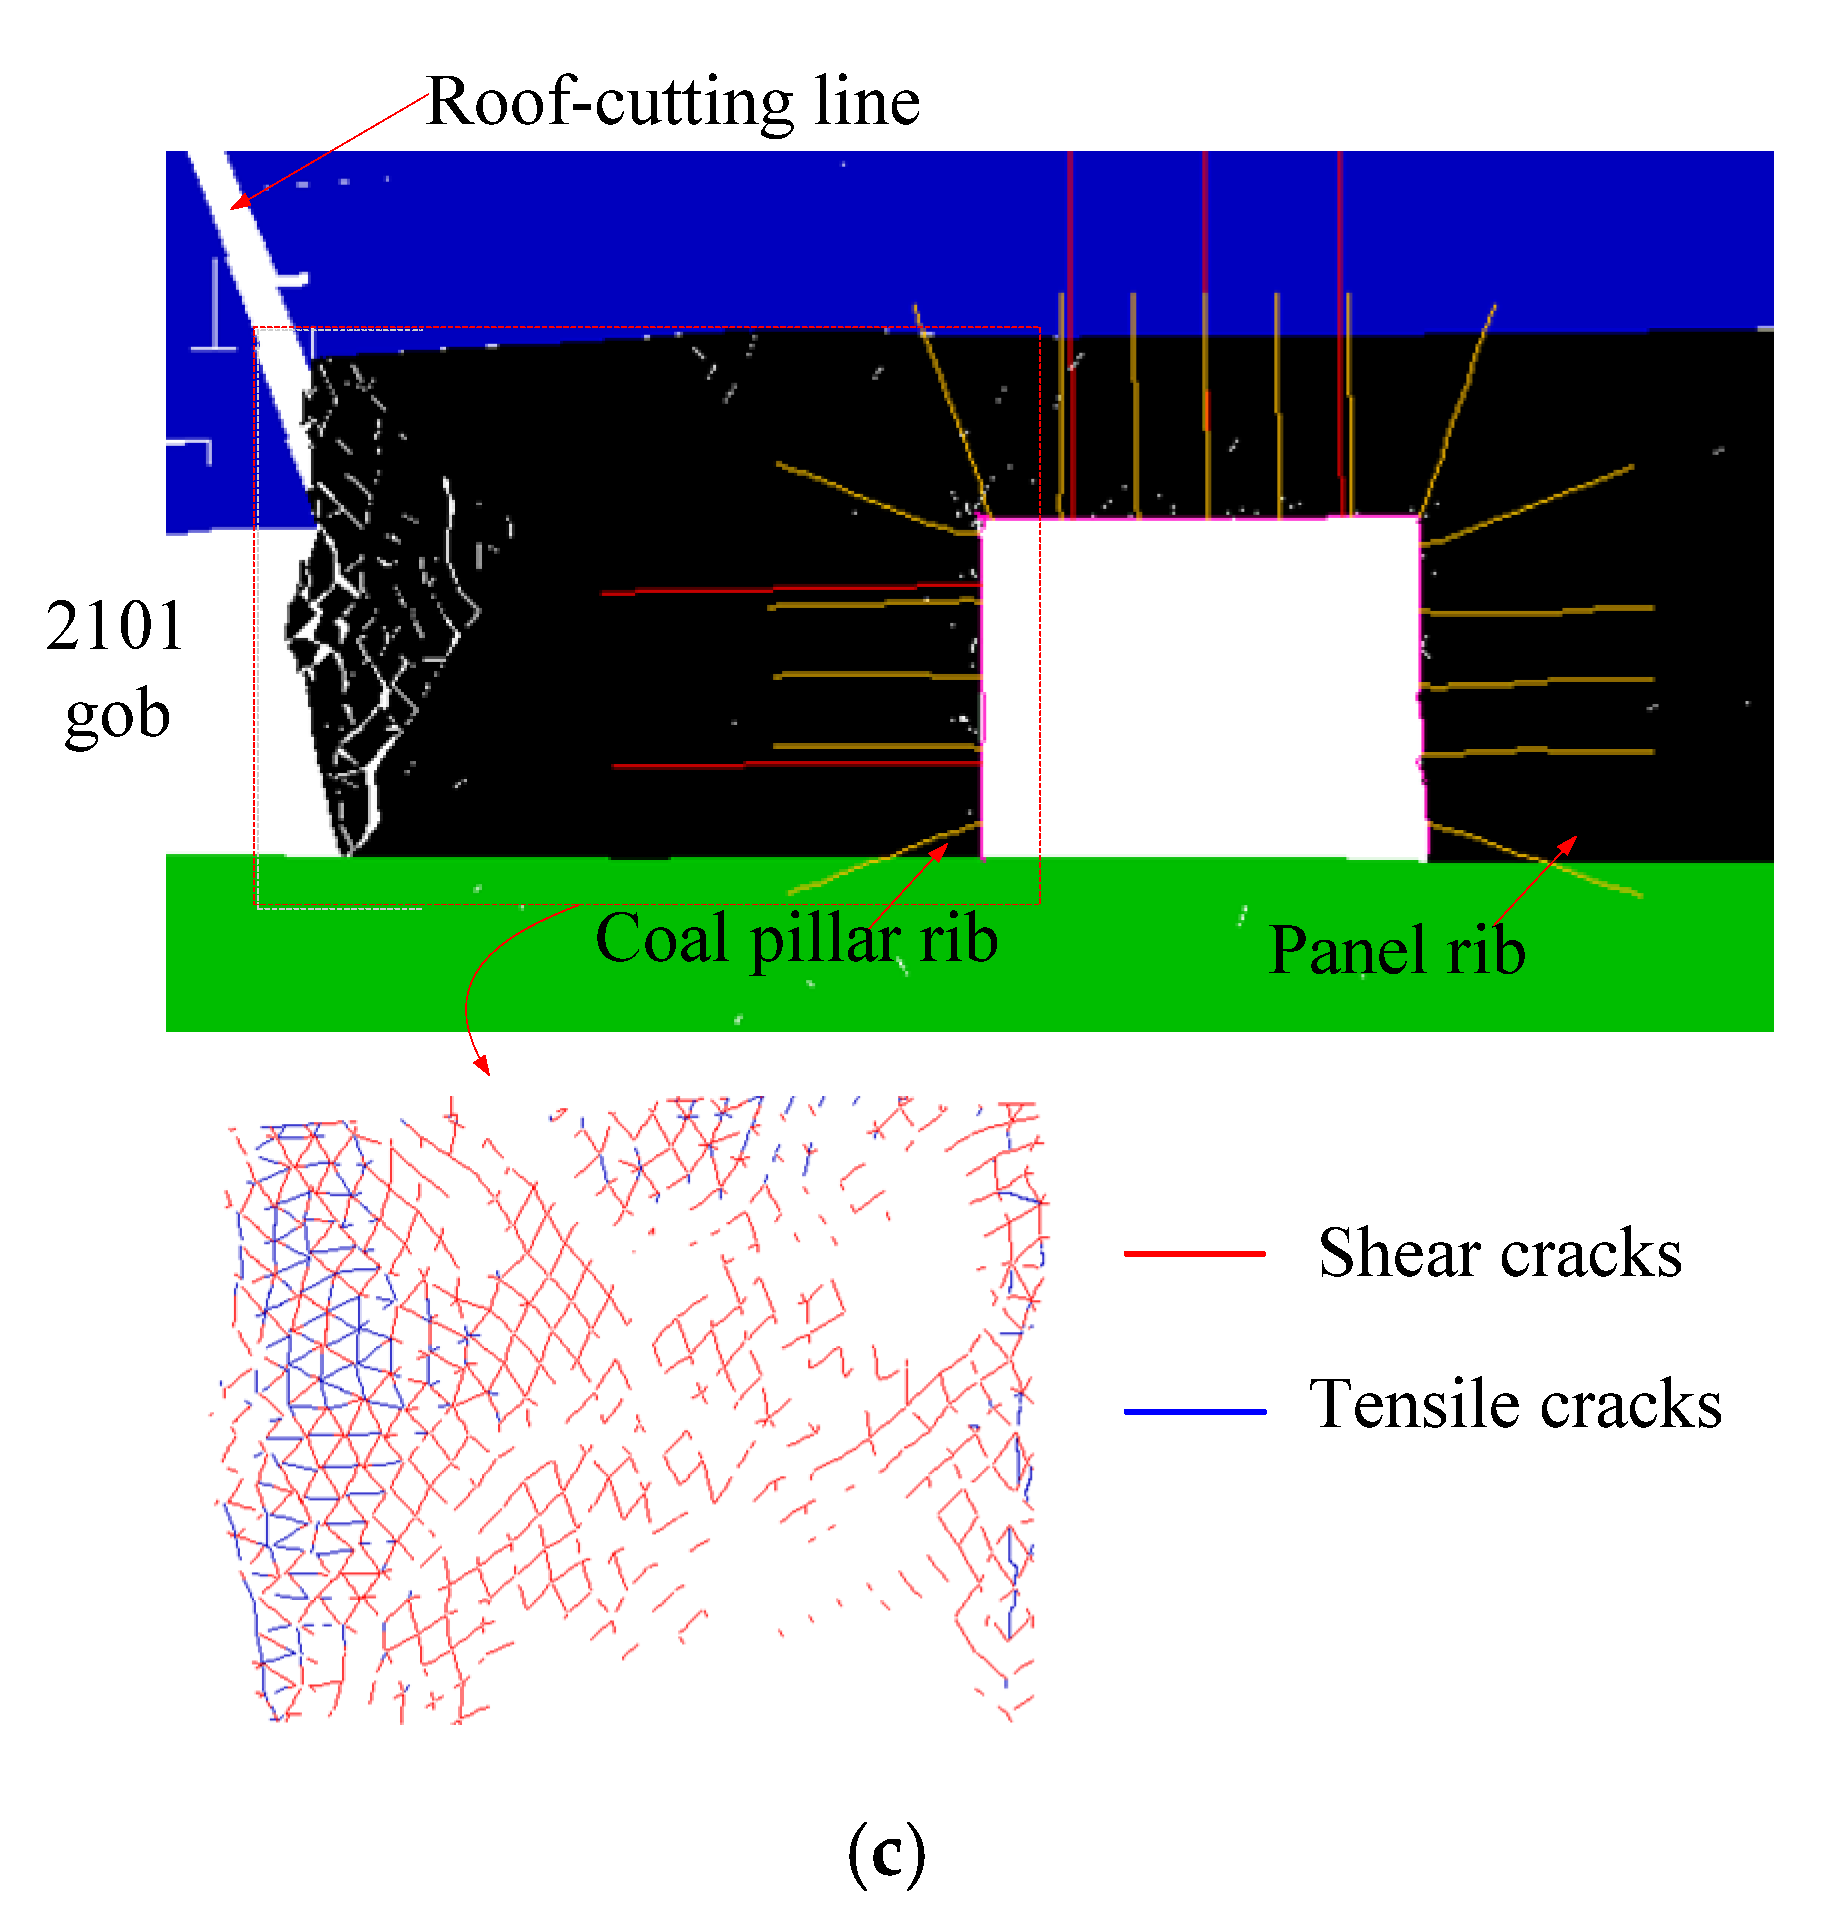 Comparative study of model tests on automatically formed roadway and  gob-side entry driving in deep coal mines - ScienceDirect